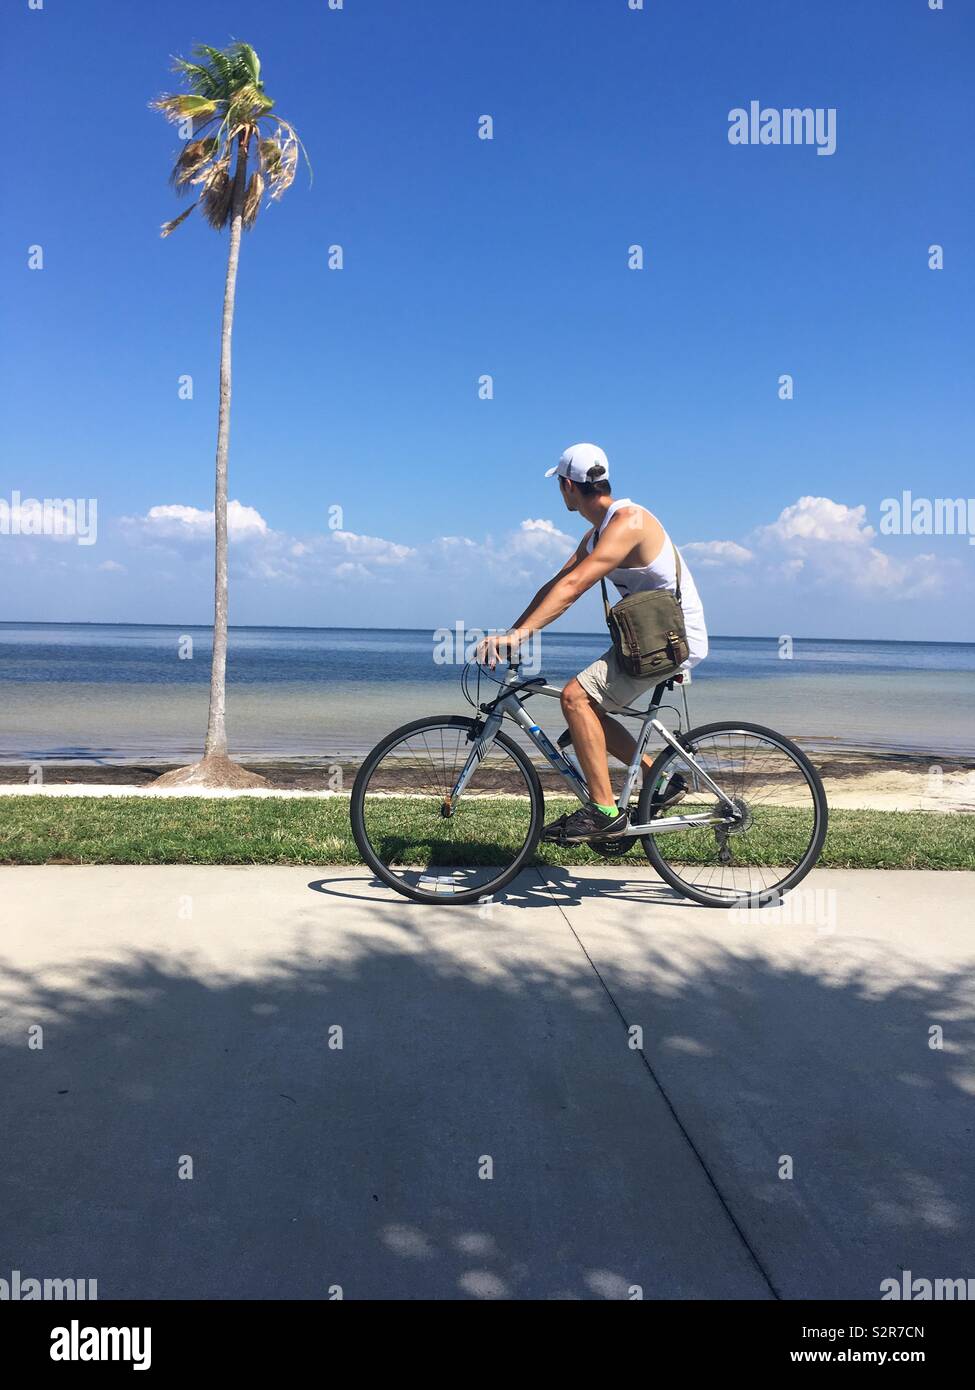 Man on bike cycling past palm tree, looking out to sea Stock Photo